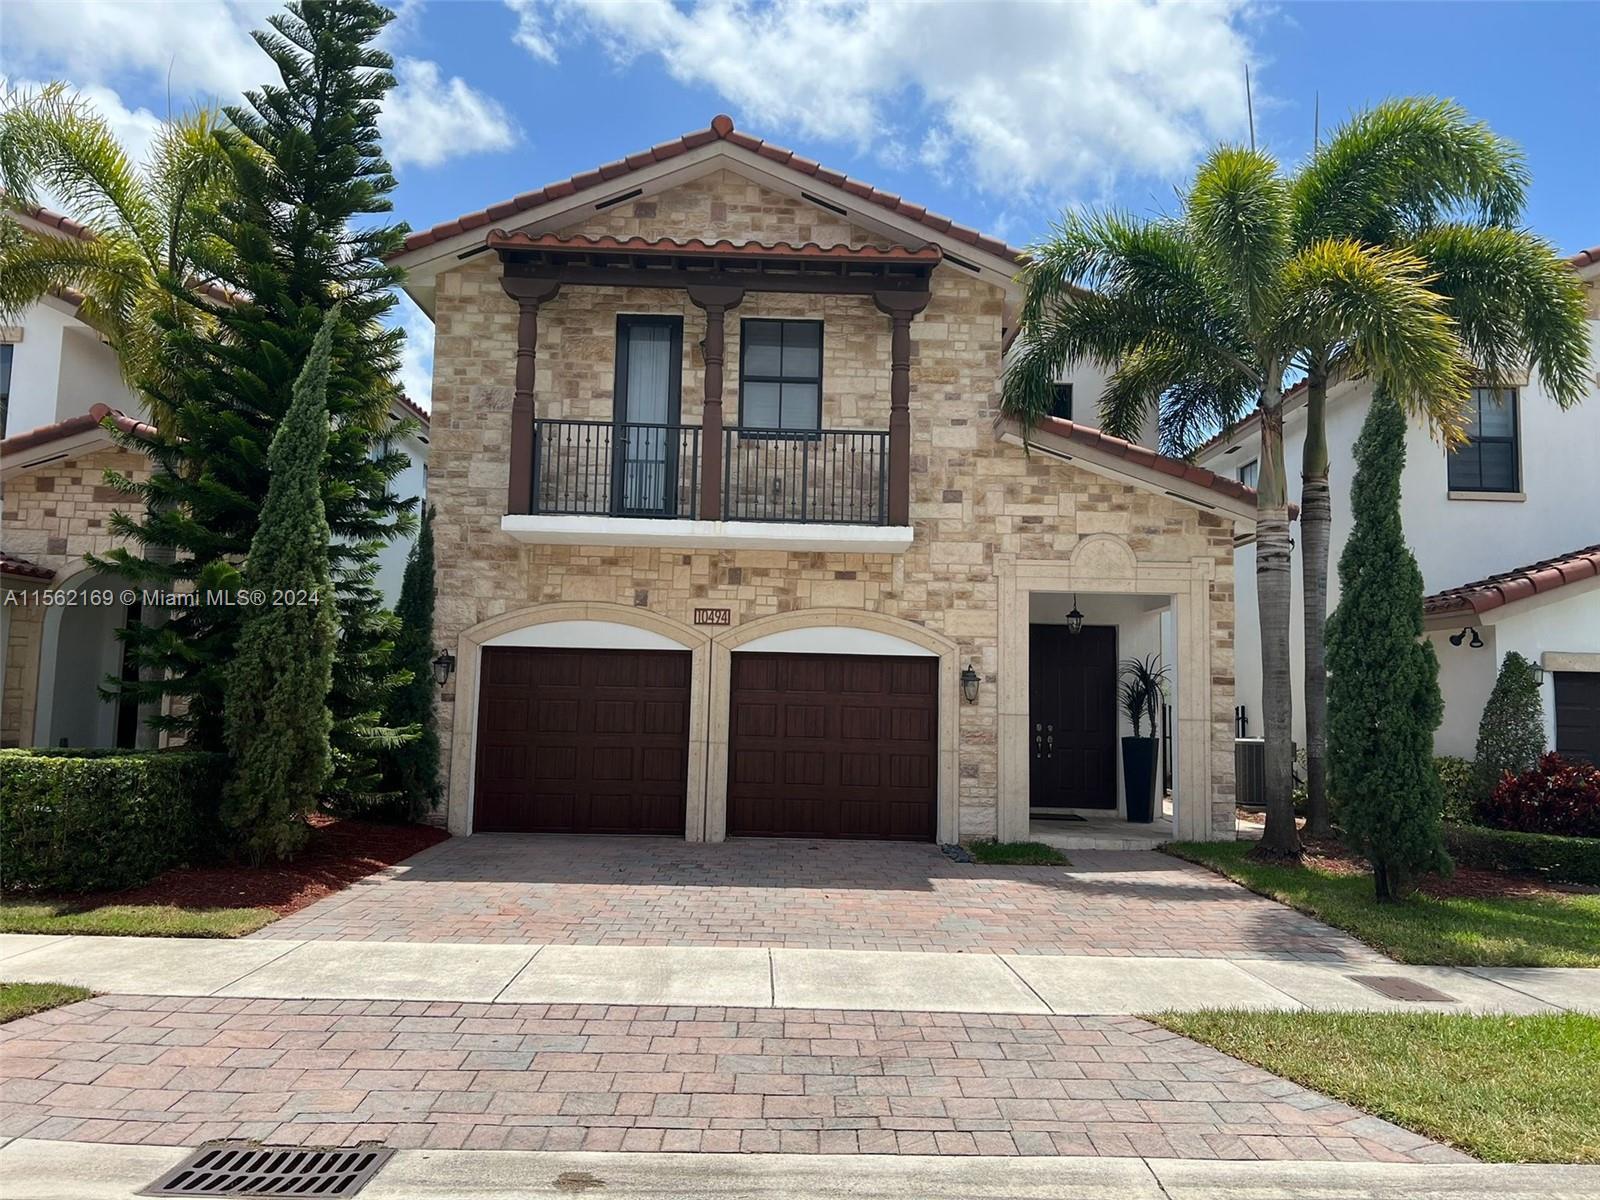 Photo of 10494 NW 70th Ln in Doral, FL